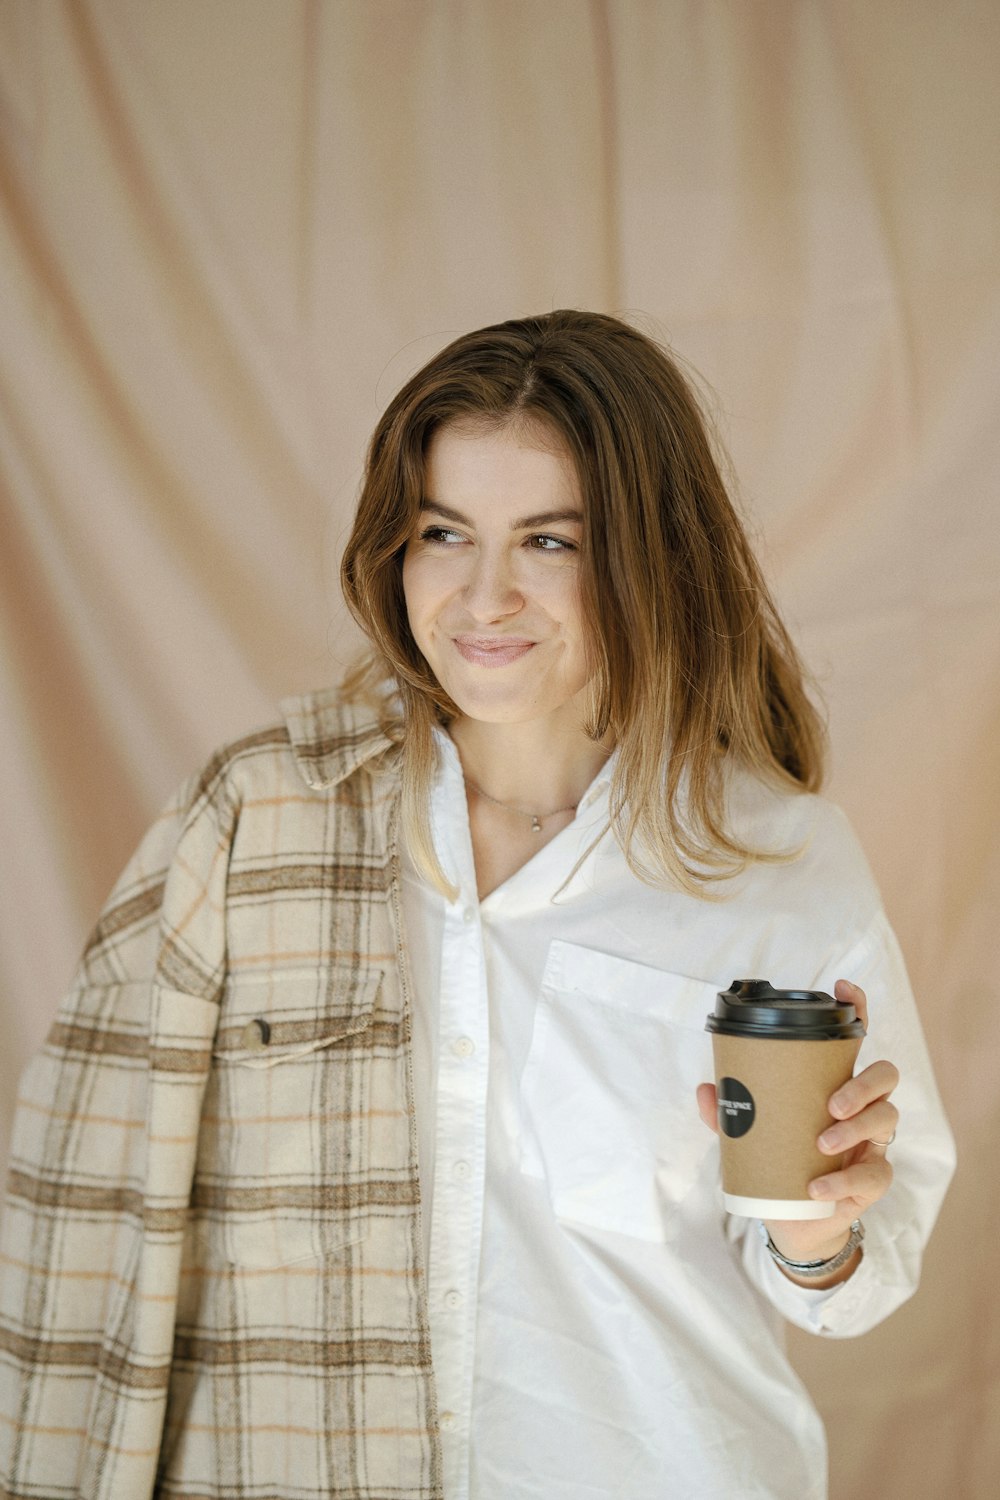 a woman is holding a cup of coffee